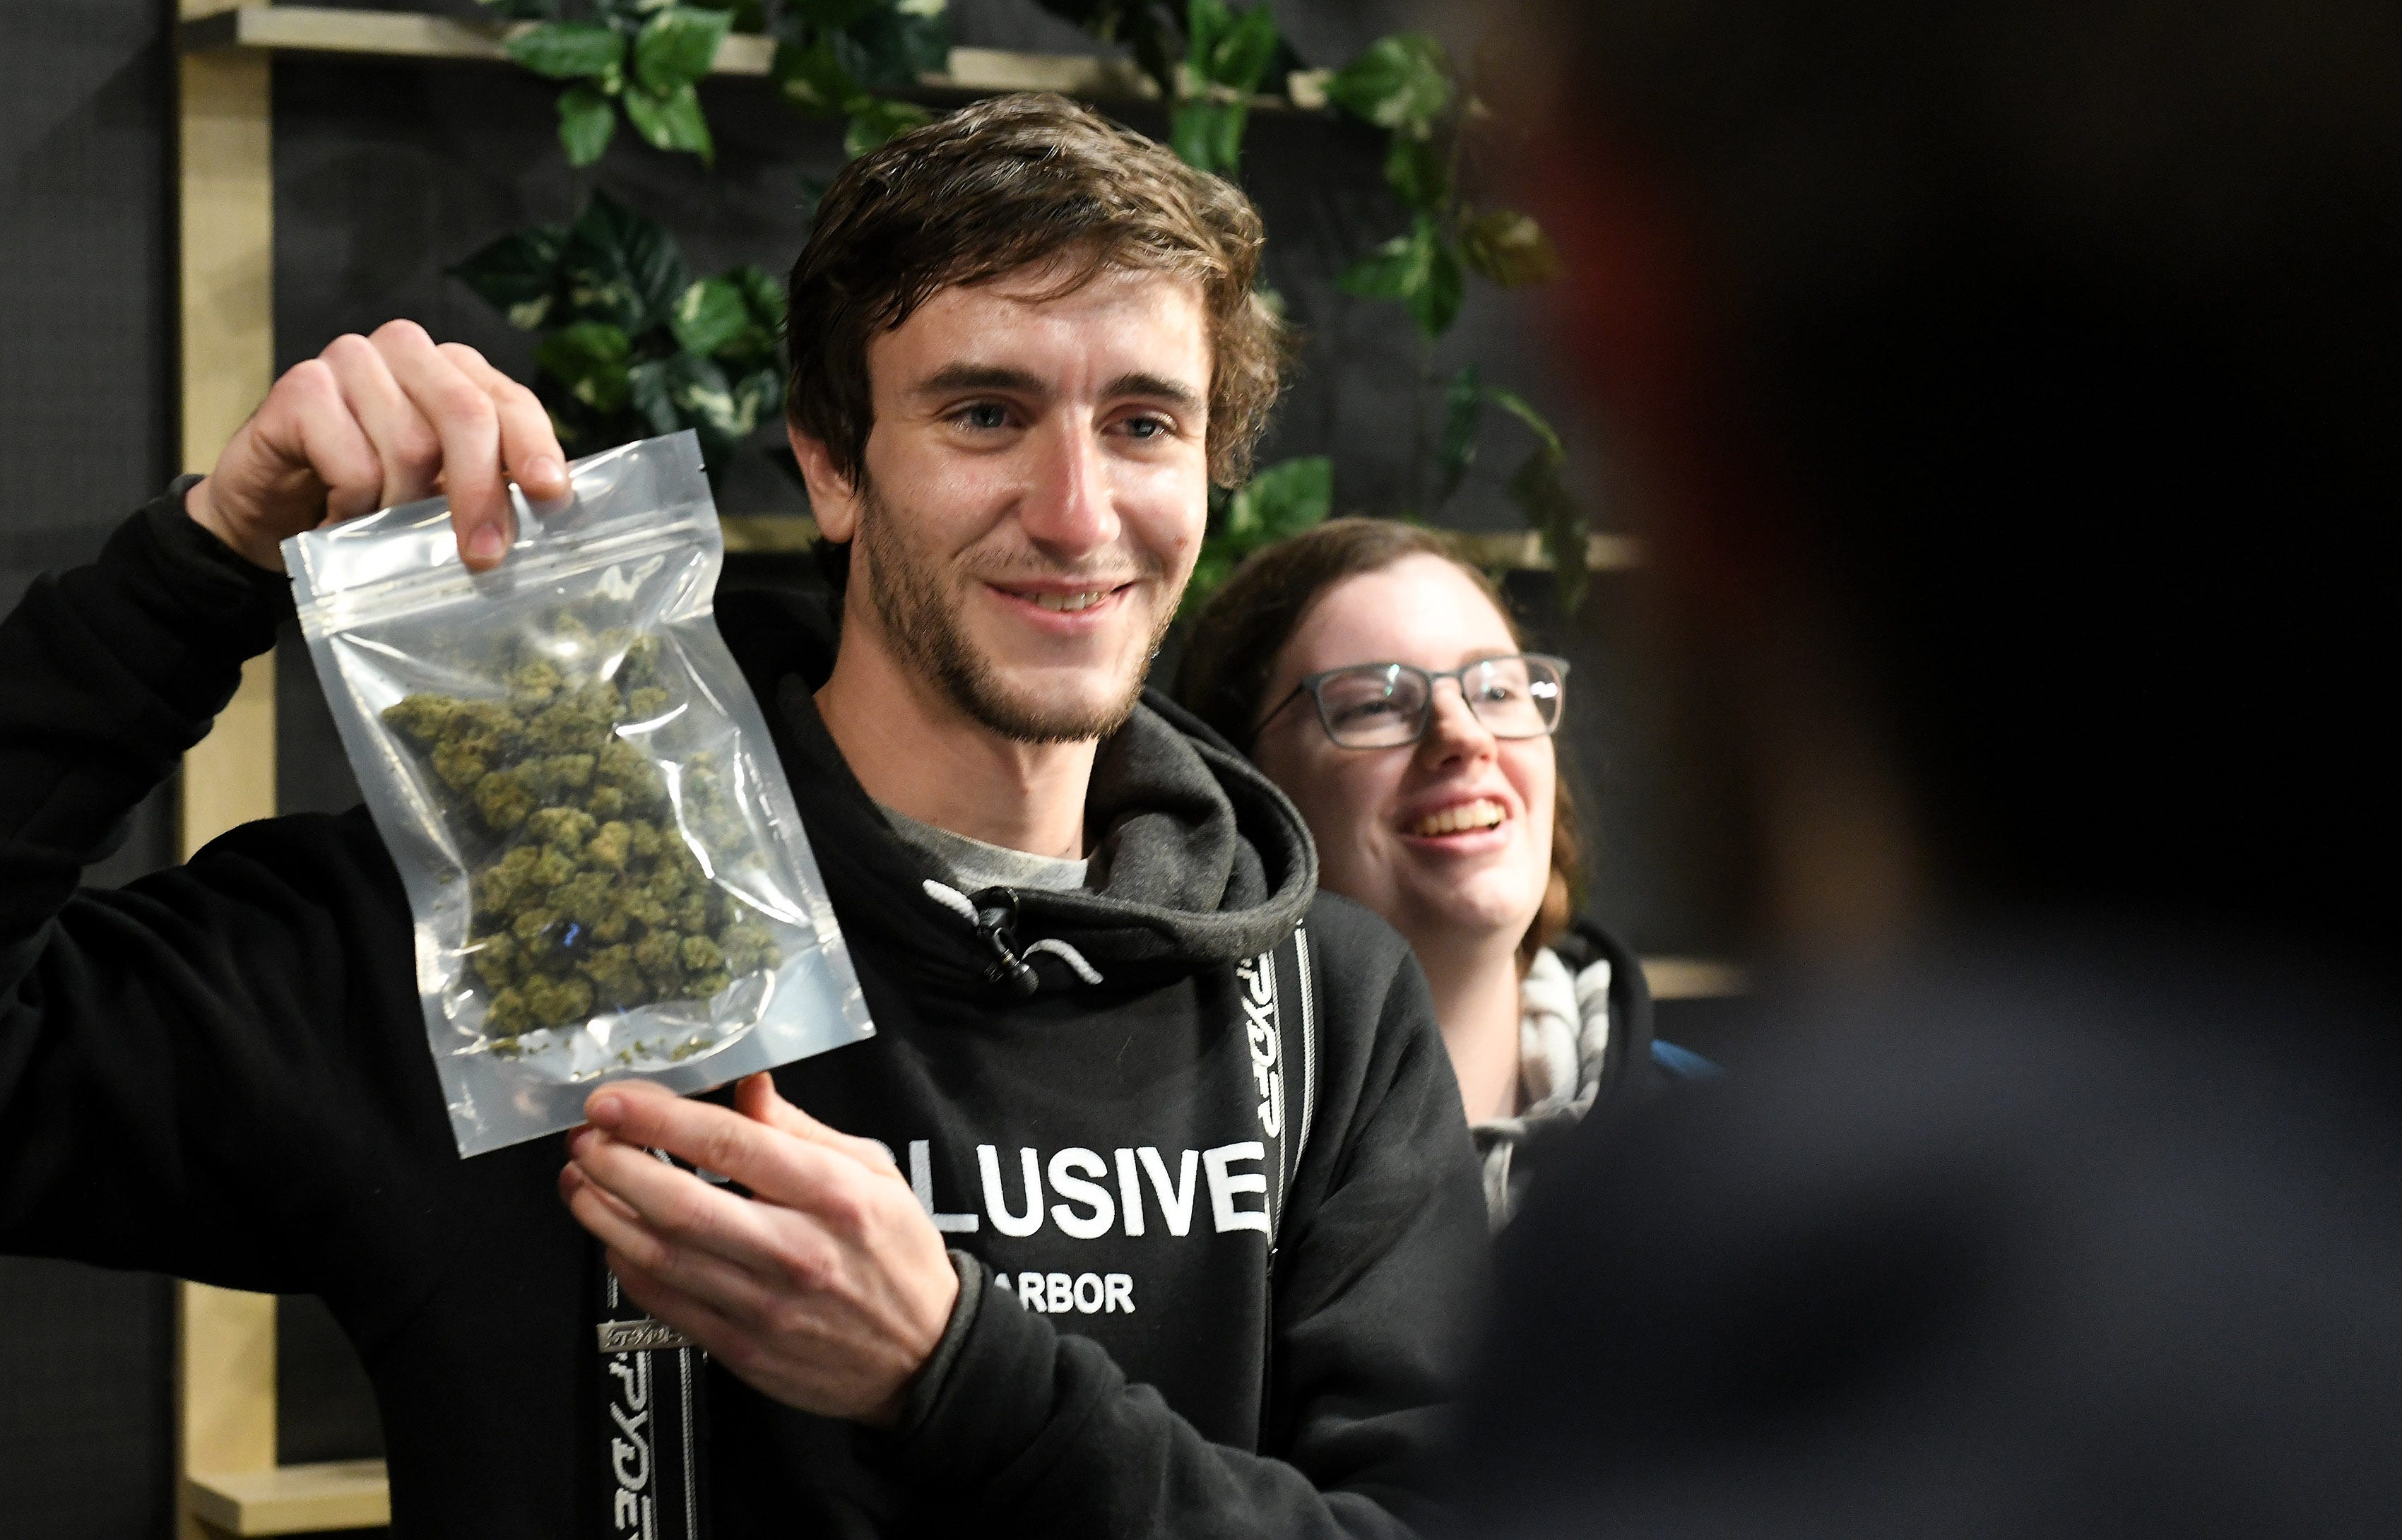 Kelly Savage, 25, of Ohio, left, with Karessa Elsberry, right, makes the first purchase of recreational marijuana at Exclusive Provisioning Center in Ann Arbor, Mich. on Dec. 1, 2019.  Savage has Type 1 diabetes and also uses marijuana socially.
(Robin Buckson / The Detroit News)